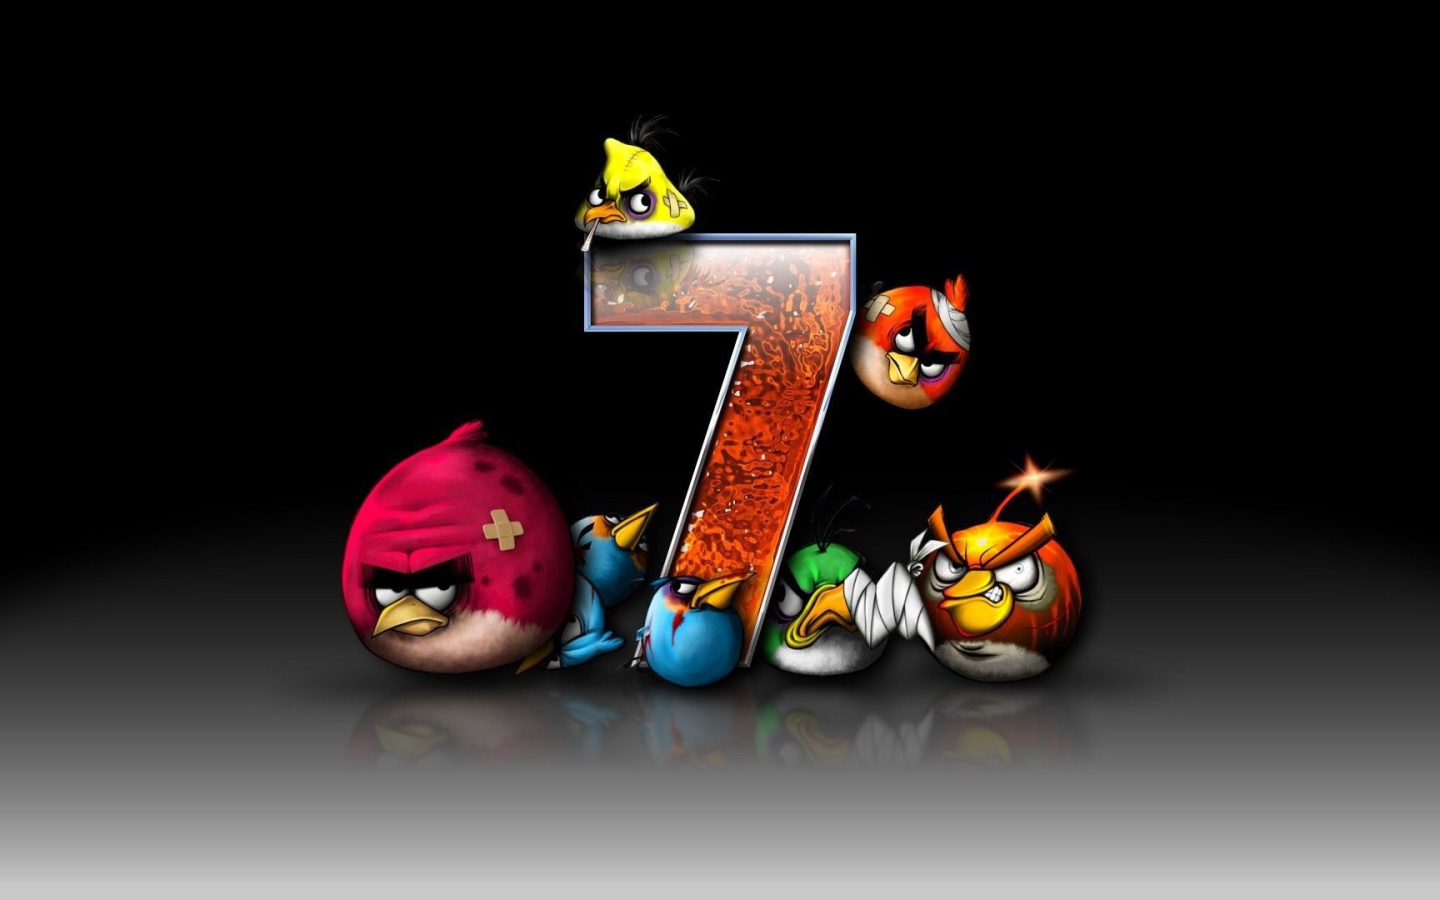 Birds of the Angry Birds characters in Windows 7 Desktop wallpapers 1440x900